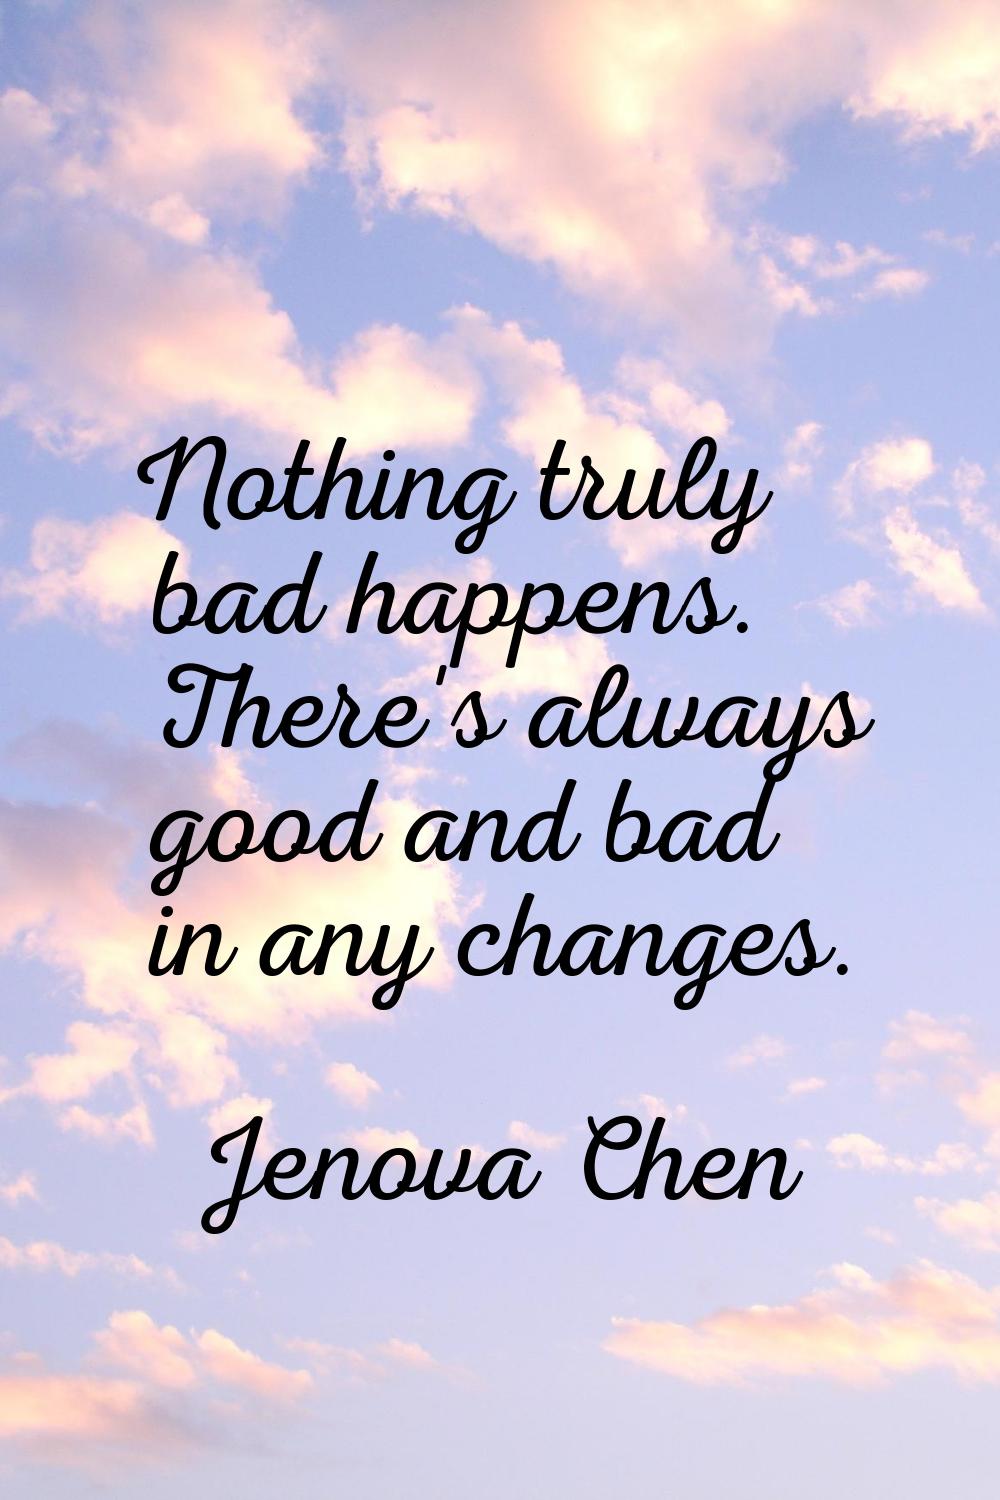 Nothing truly bad happens. There's always good and bad in any changes.